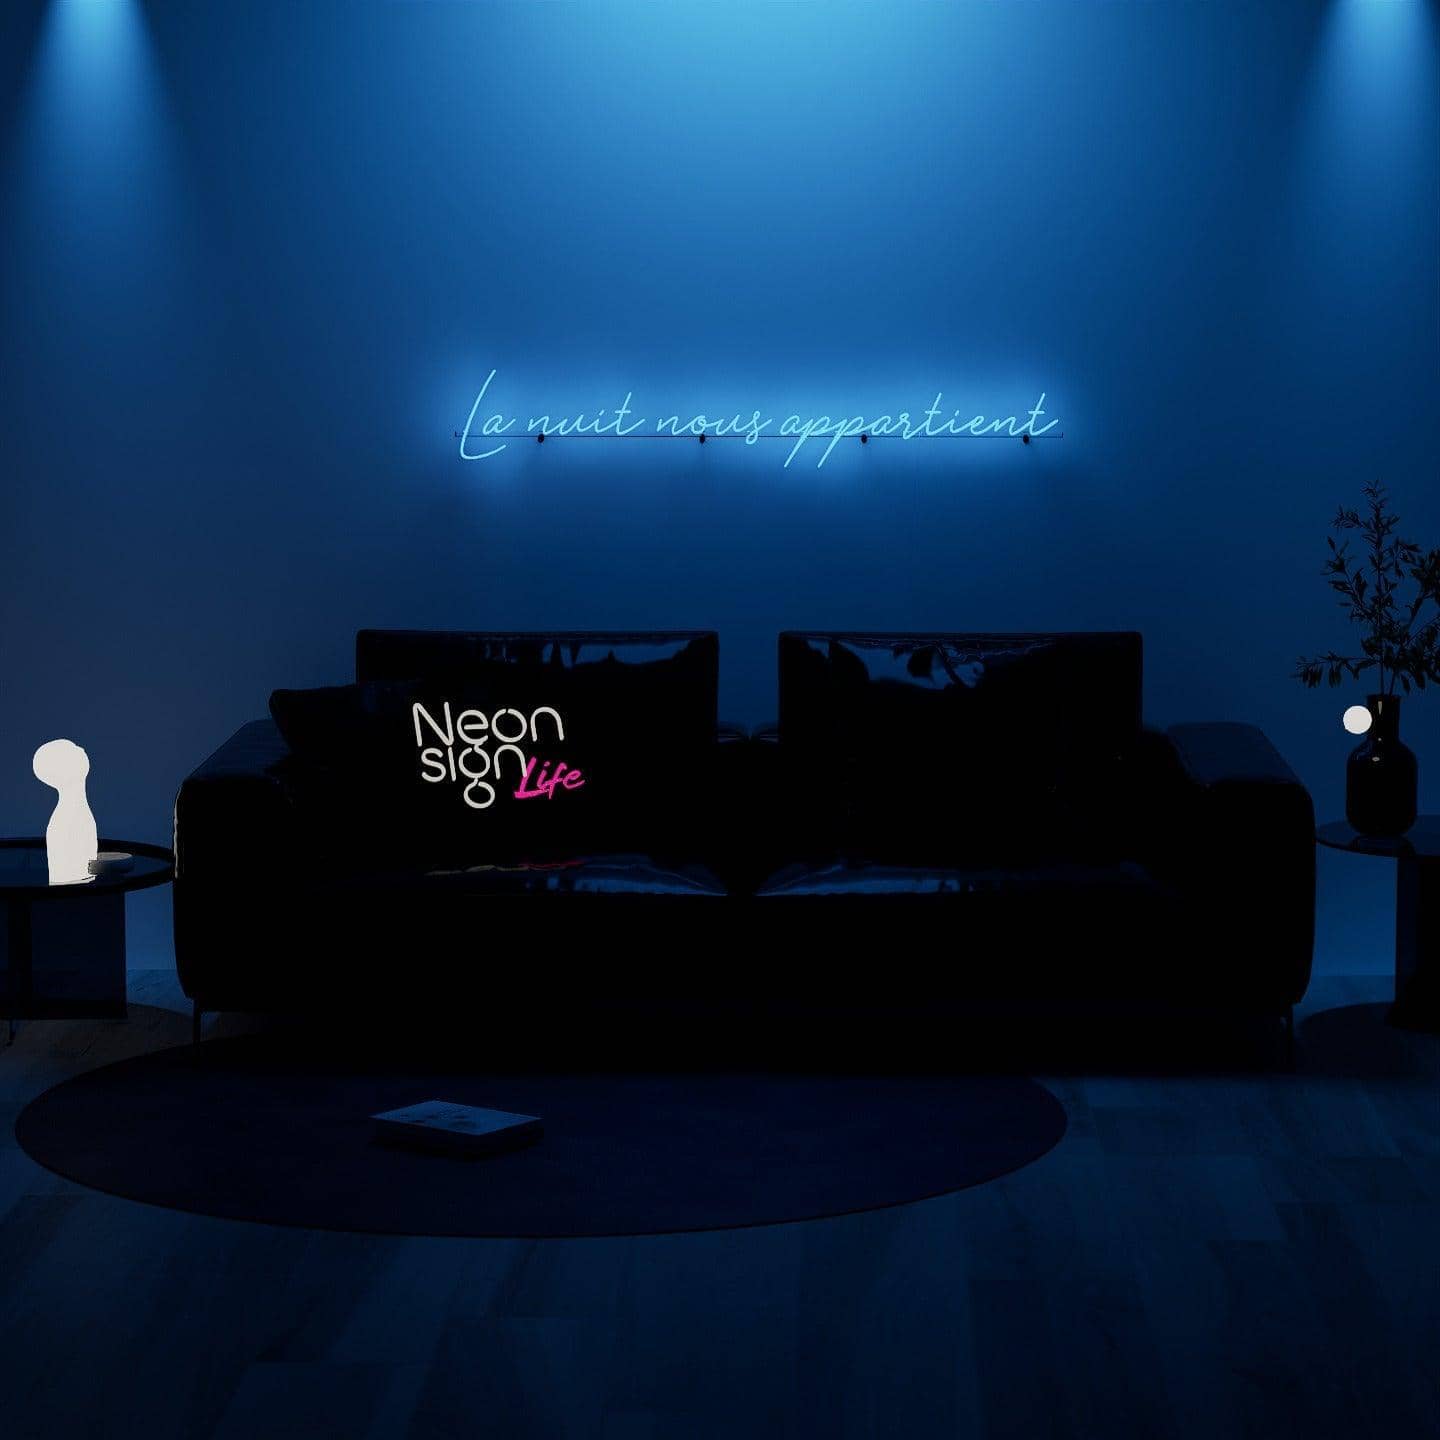 light-up-blue-neon-lights-hanging-on-the-wall-for-display-at-night-la-nuit-nous-appartient